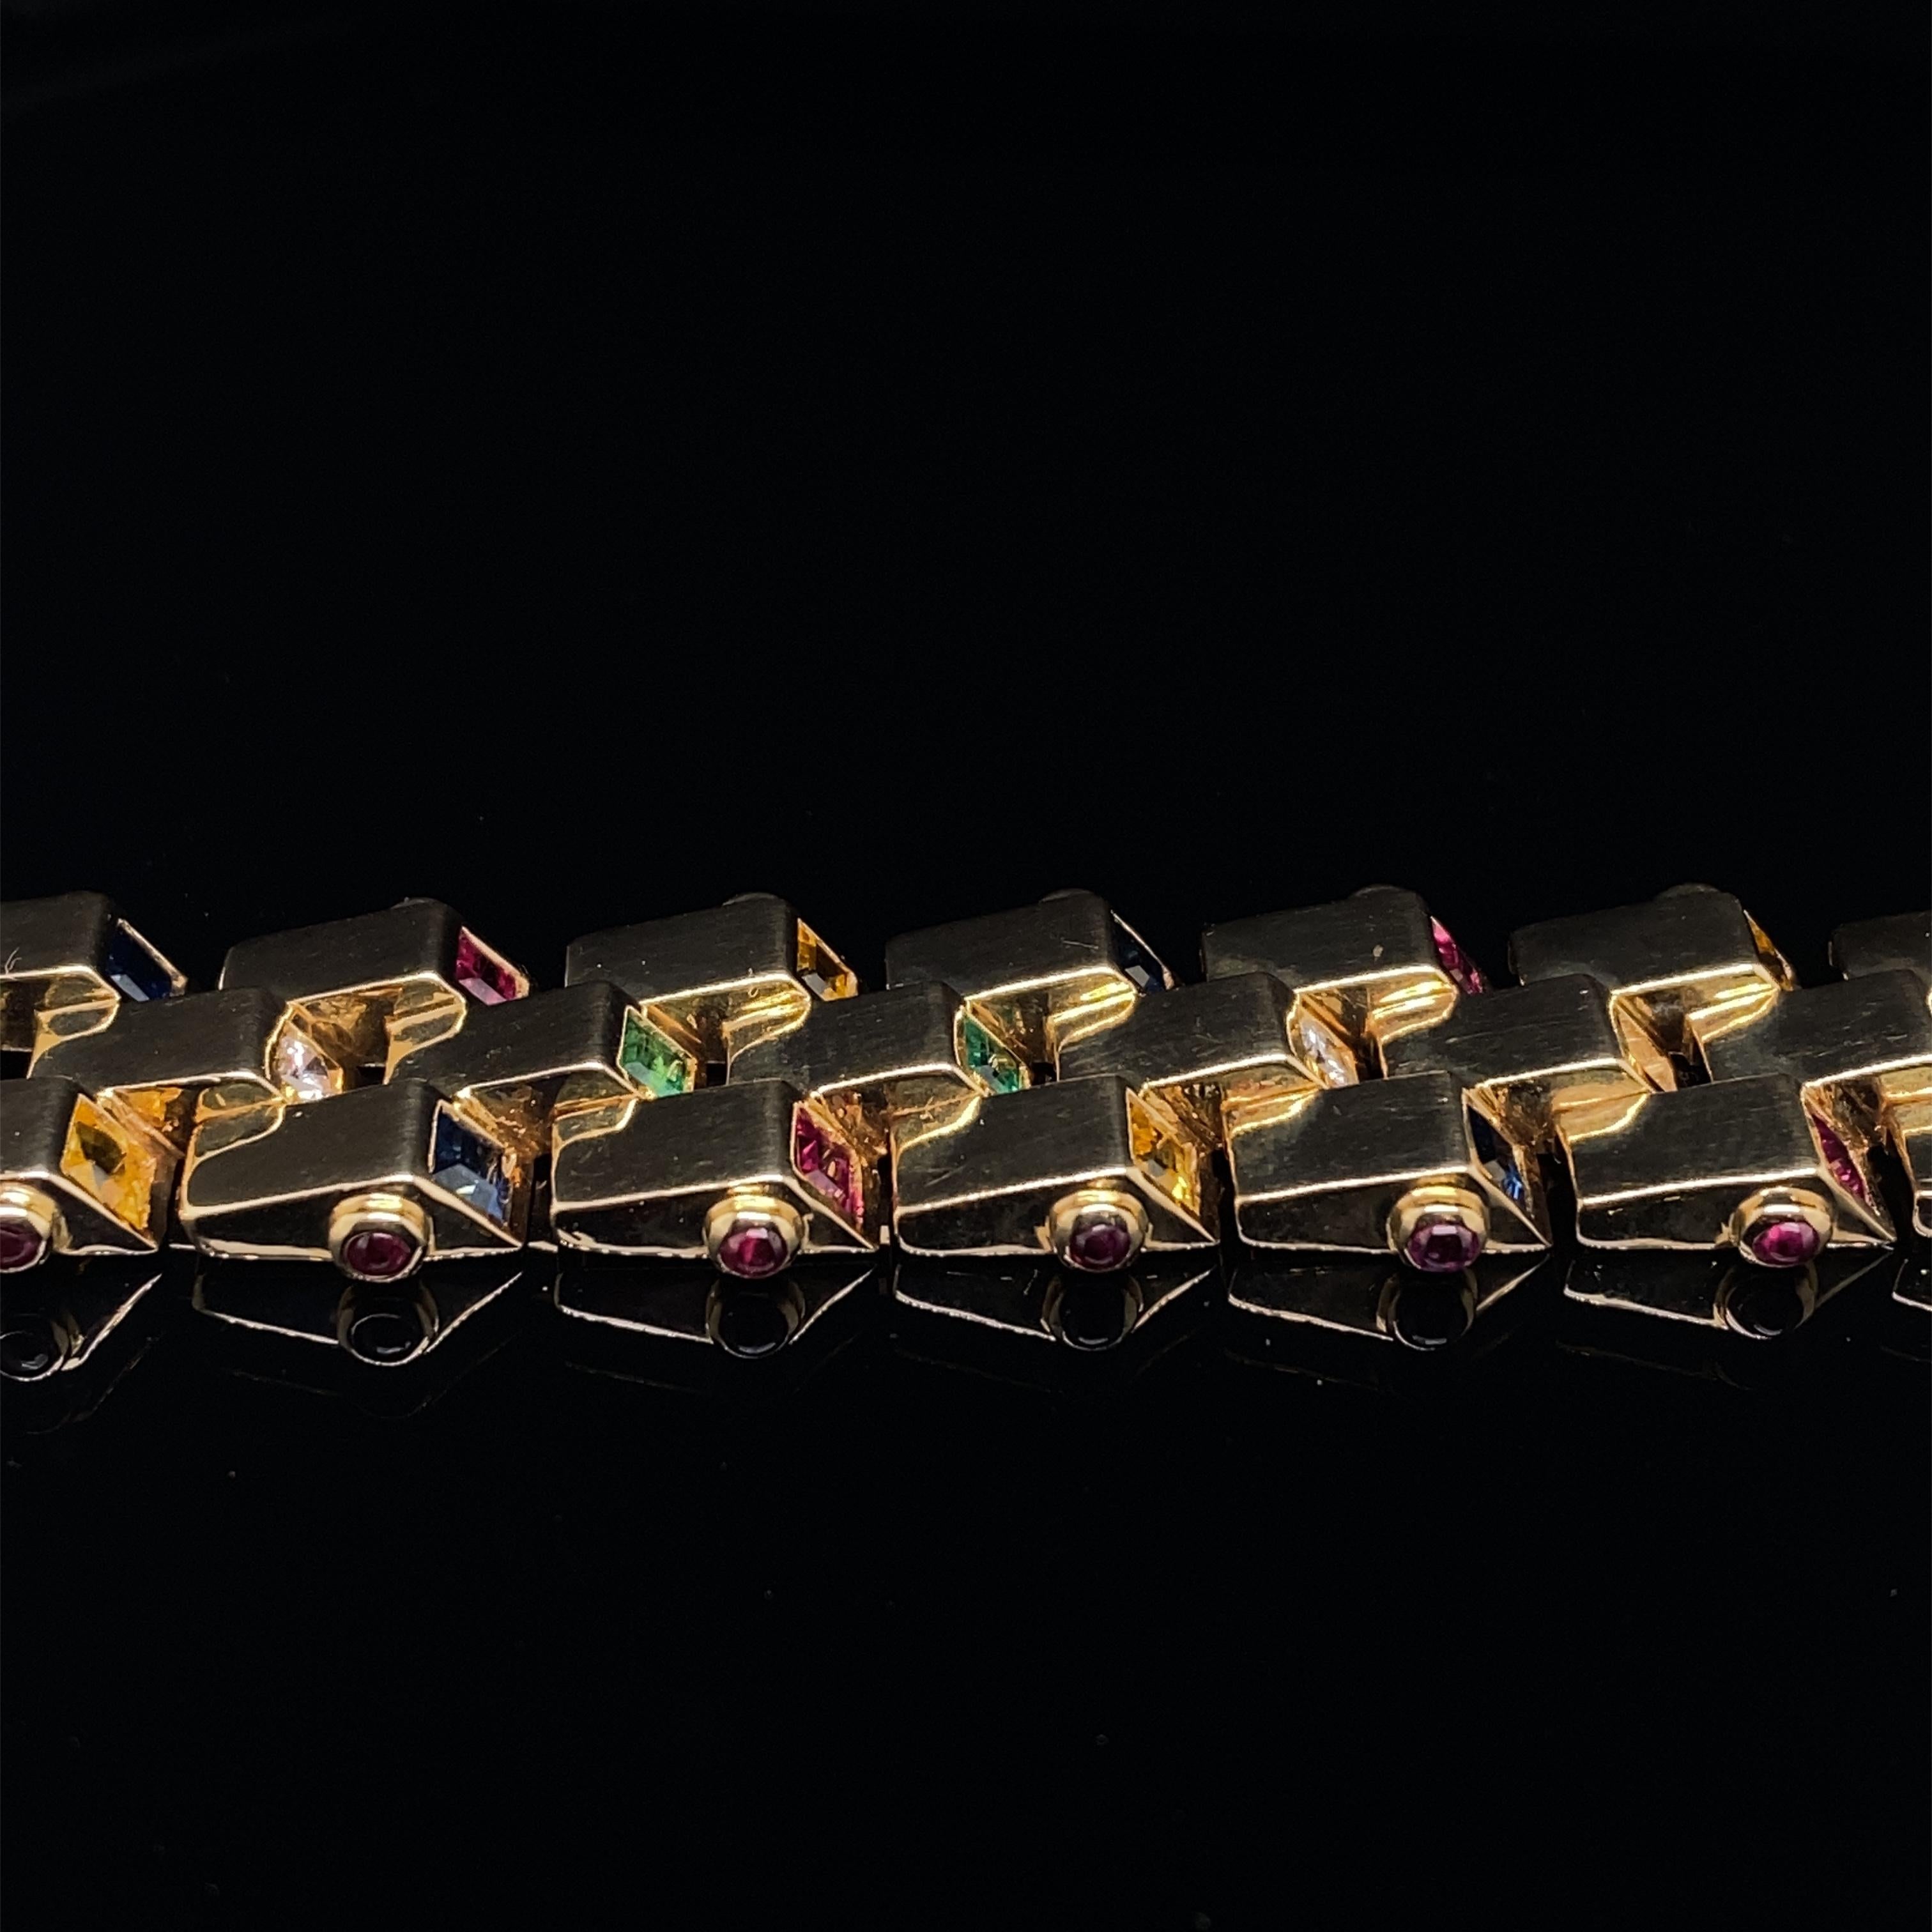 A vintage diamond, sapphire, emerald and ruby bracelet in 18 karat yellow gold, circa 1960.

This exceptional bracelet is set with square cut diamonds, sapphires, emeralds, rubies and citrines, circa 1960.

This bold and playful piece is comprised